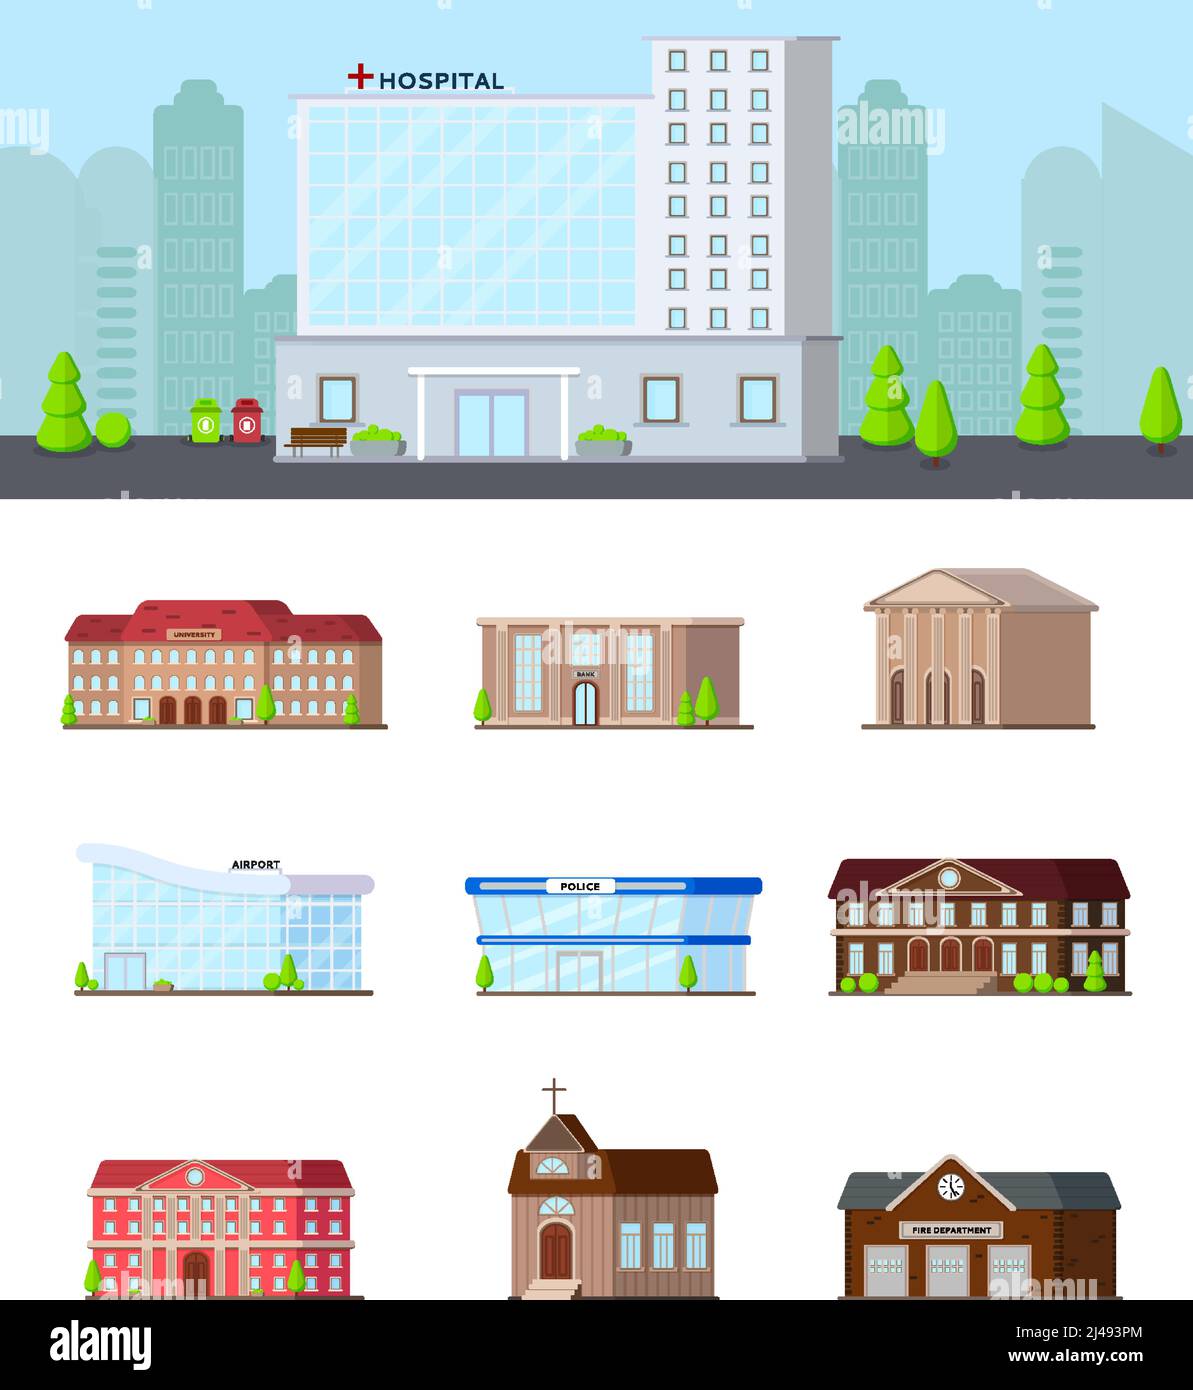 Municipal buildings flat set of isolated icons on blank background with hospital in city landscape composition vector illustration Stock Vector